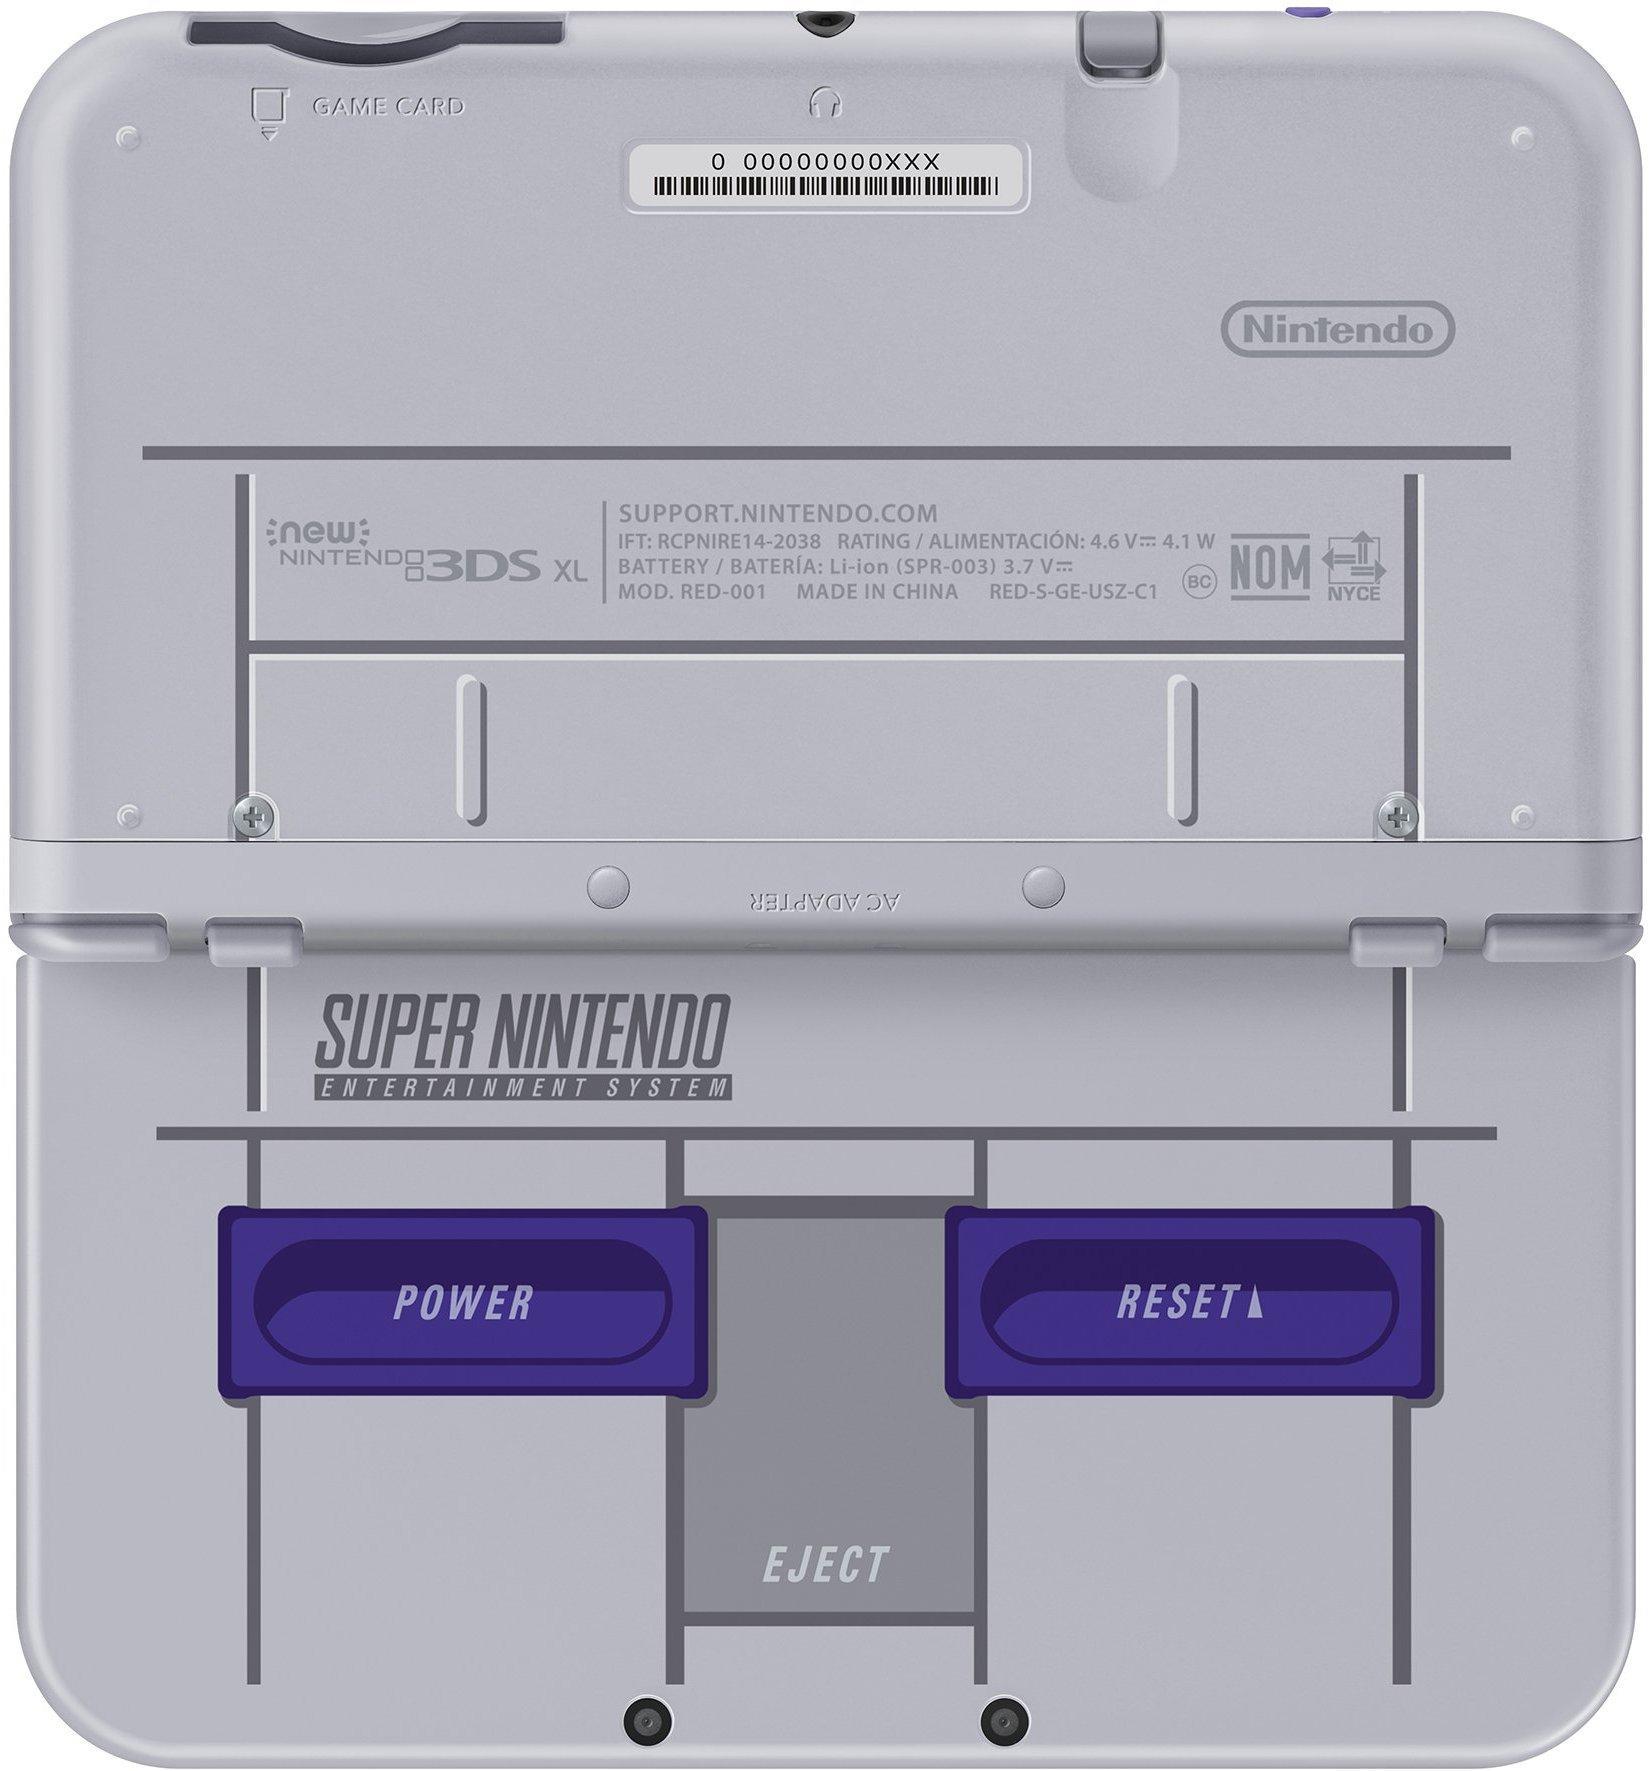 snes9x for 3ds how to install